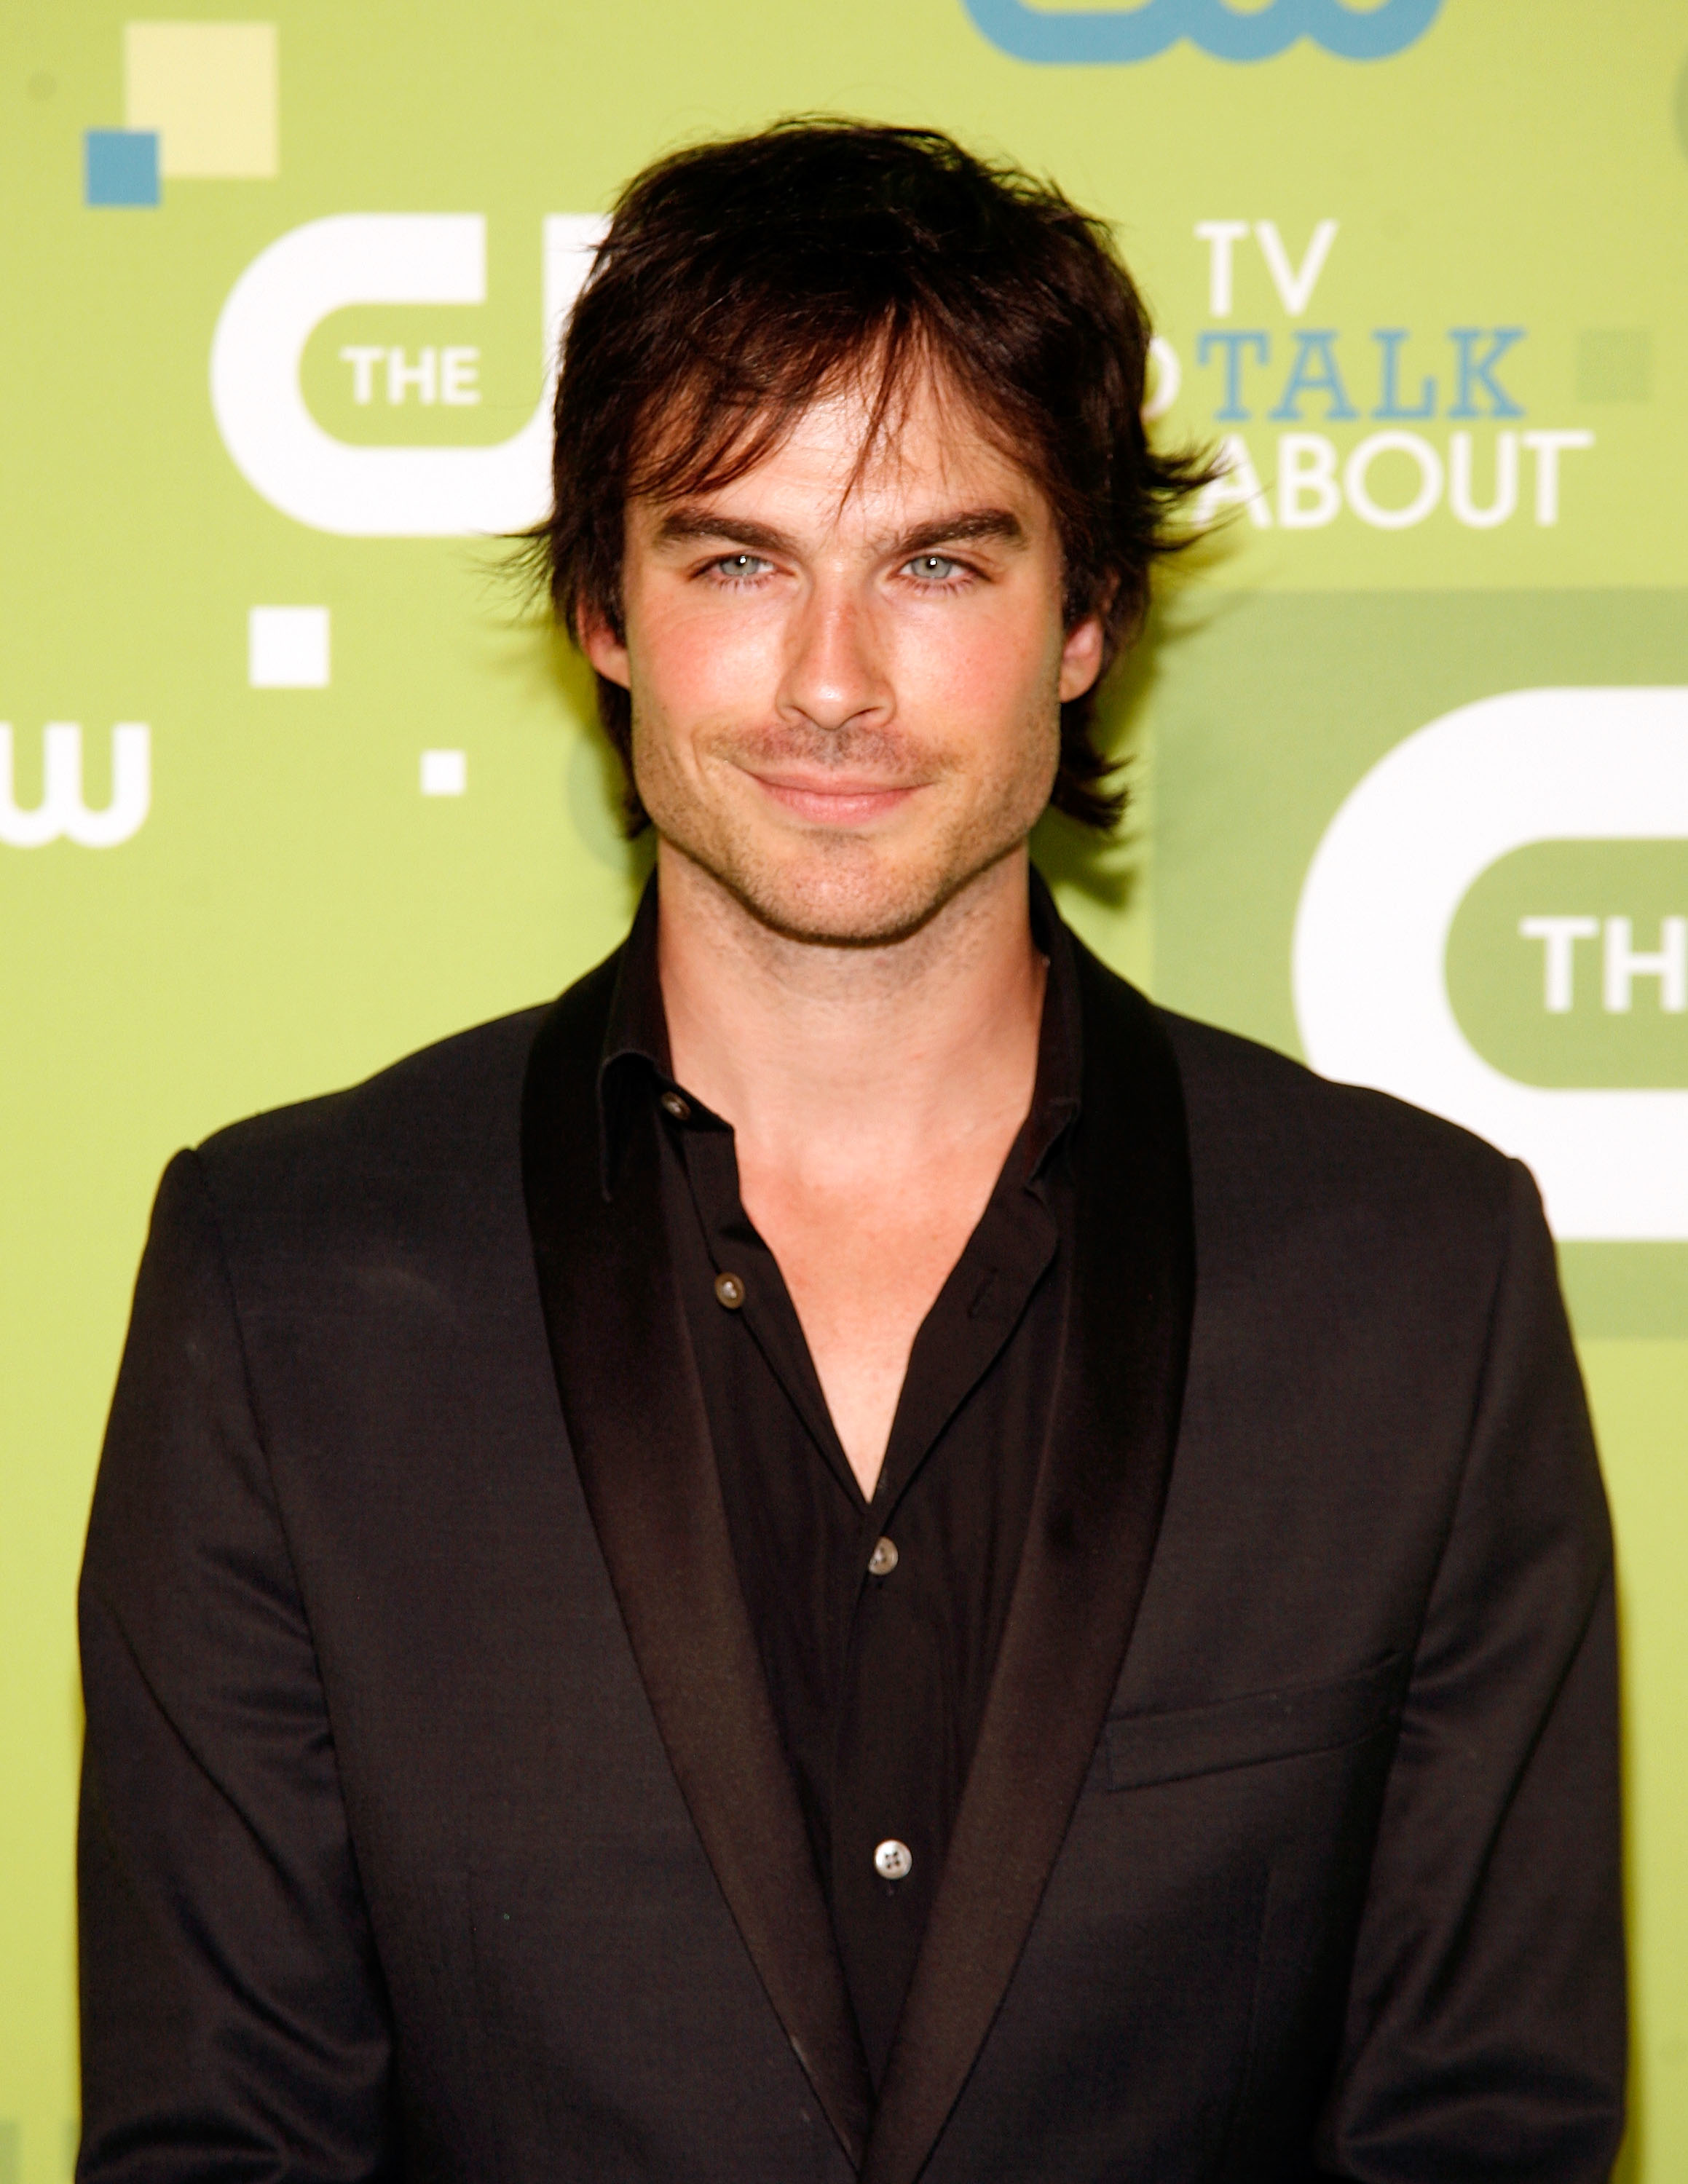 NEW YORK, NY - MAY 19: Ian Somerhalder attends the CW Network's 2011 Upfront at Jazz at Lincoln Center on May 19, 2011 in New York City. (Photo by Andy Kropa/Getty Images)